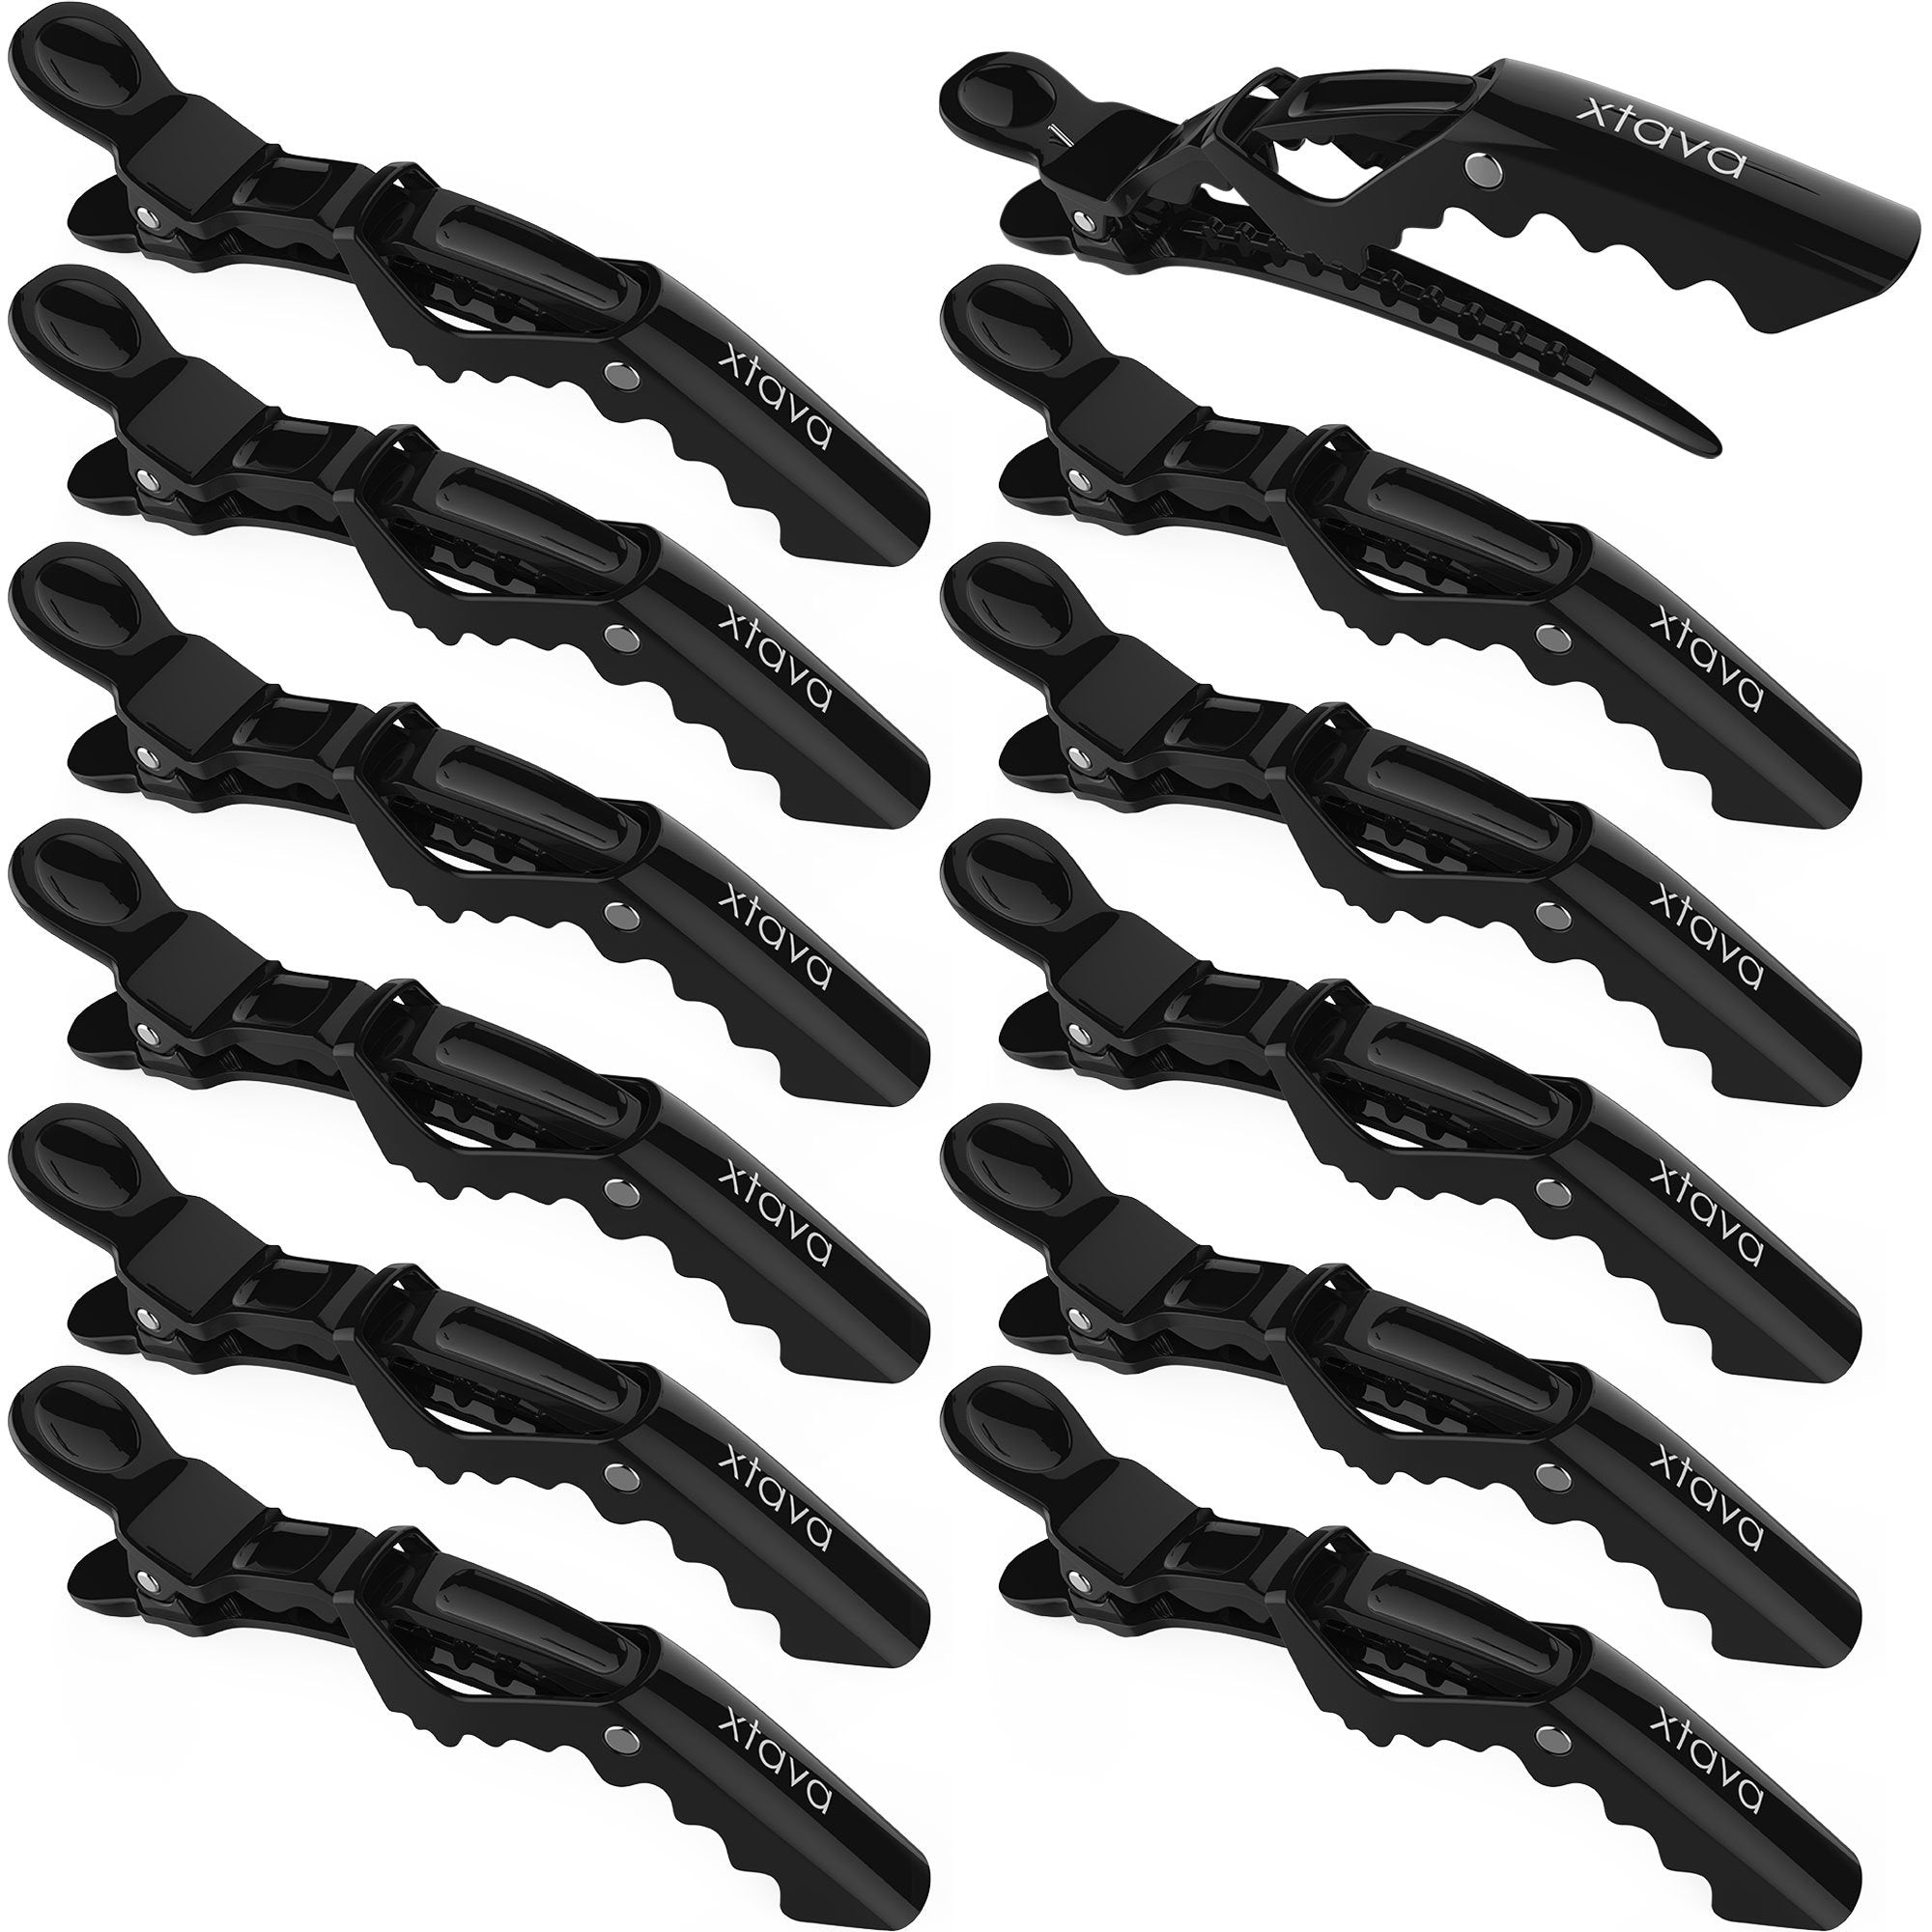 Xtava Styling Hair Clips for Women - 12 pcs Professional Plastic Hair Sectioning Clips - Durable Alligator Hair Clip with Nonslip Grip and Wide Teeth for Easy Styling of Thick and Thin Hair